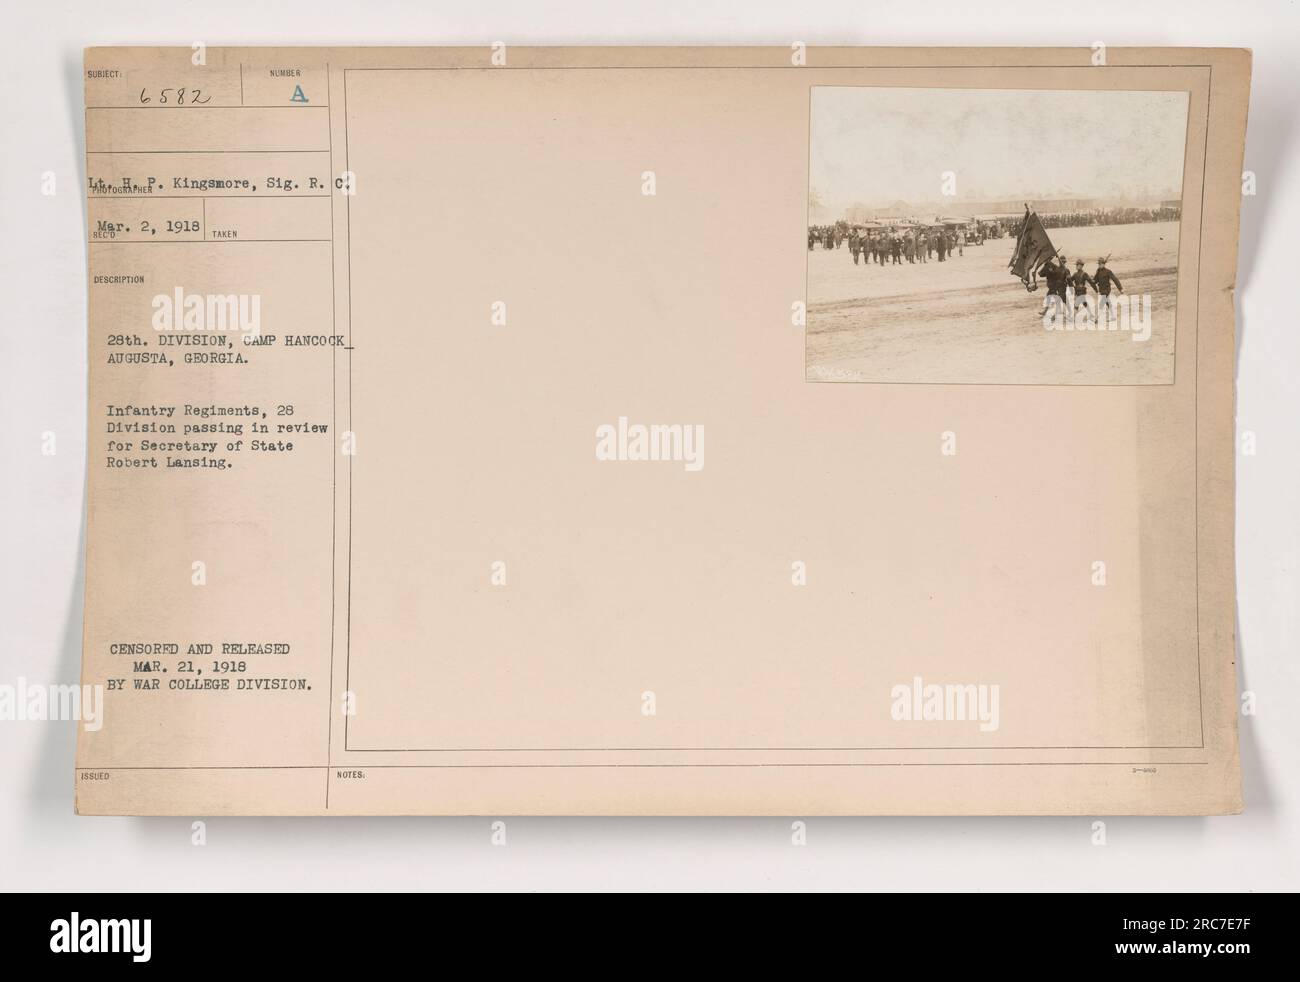 Infantry regiments of the 28th Division passing in review for Secretary of State Robert Lansing during a military event at Camp Hancock in Augusta, Georgia on March 2, 1918. This photograph was censored and released by the War College Division on March 21, 1918. Stock Photo